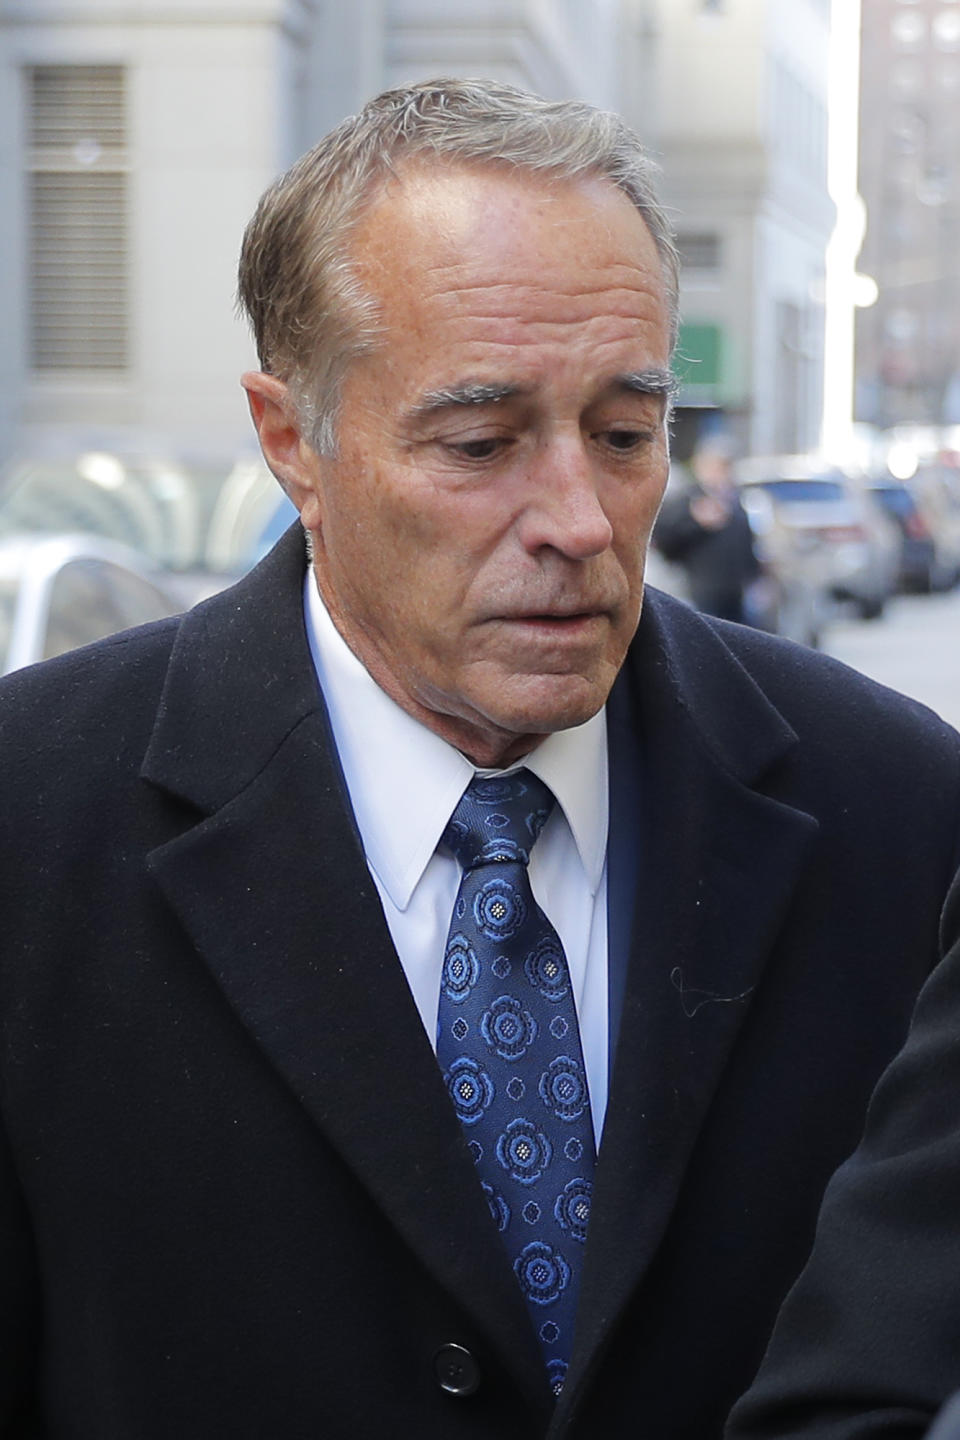 Former U.S. Rep. Chris Collins arrives at federal court for sentencing Friday, Jan. 17, 2020, in New York. Collins pleaded guilty last fall to insider trading and lying to the FBI. (AP Photo/Seth Wenig)